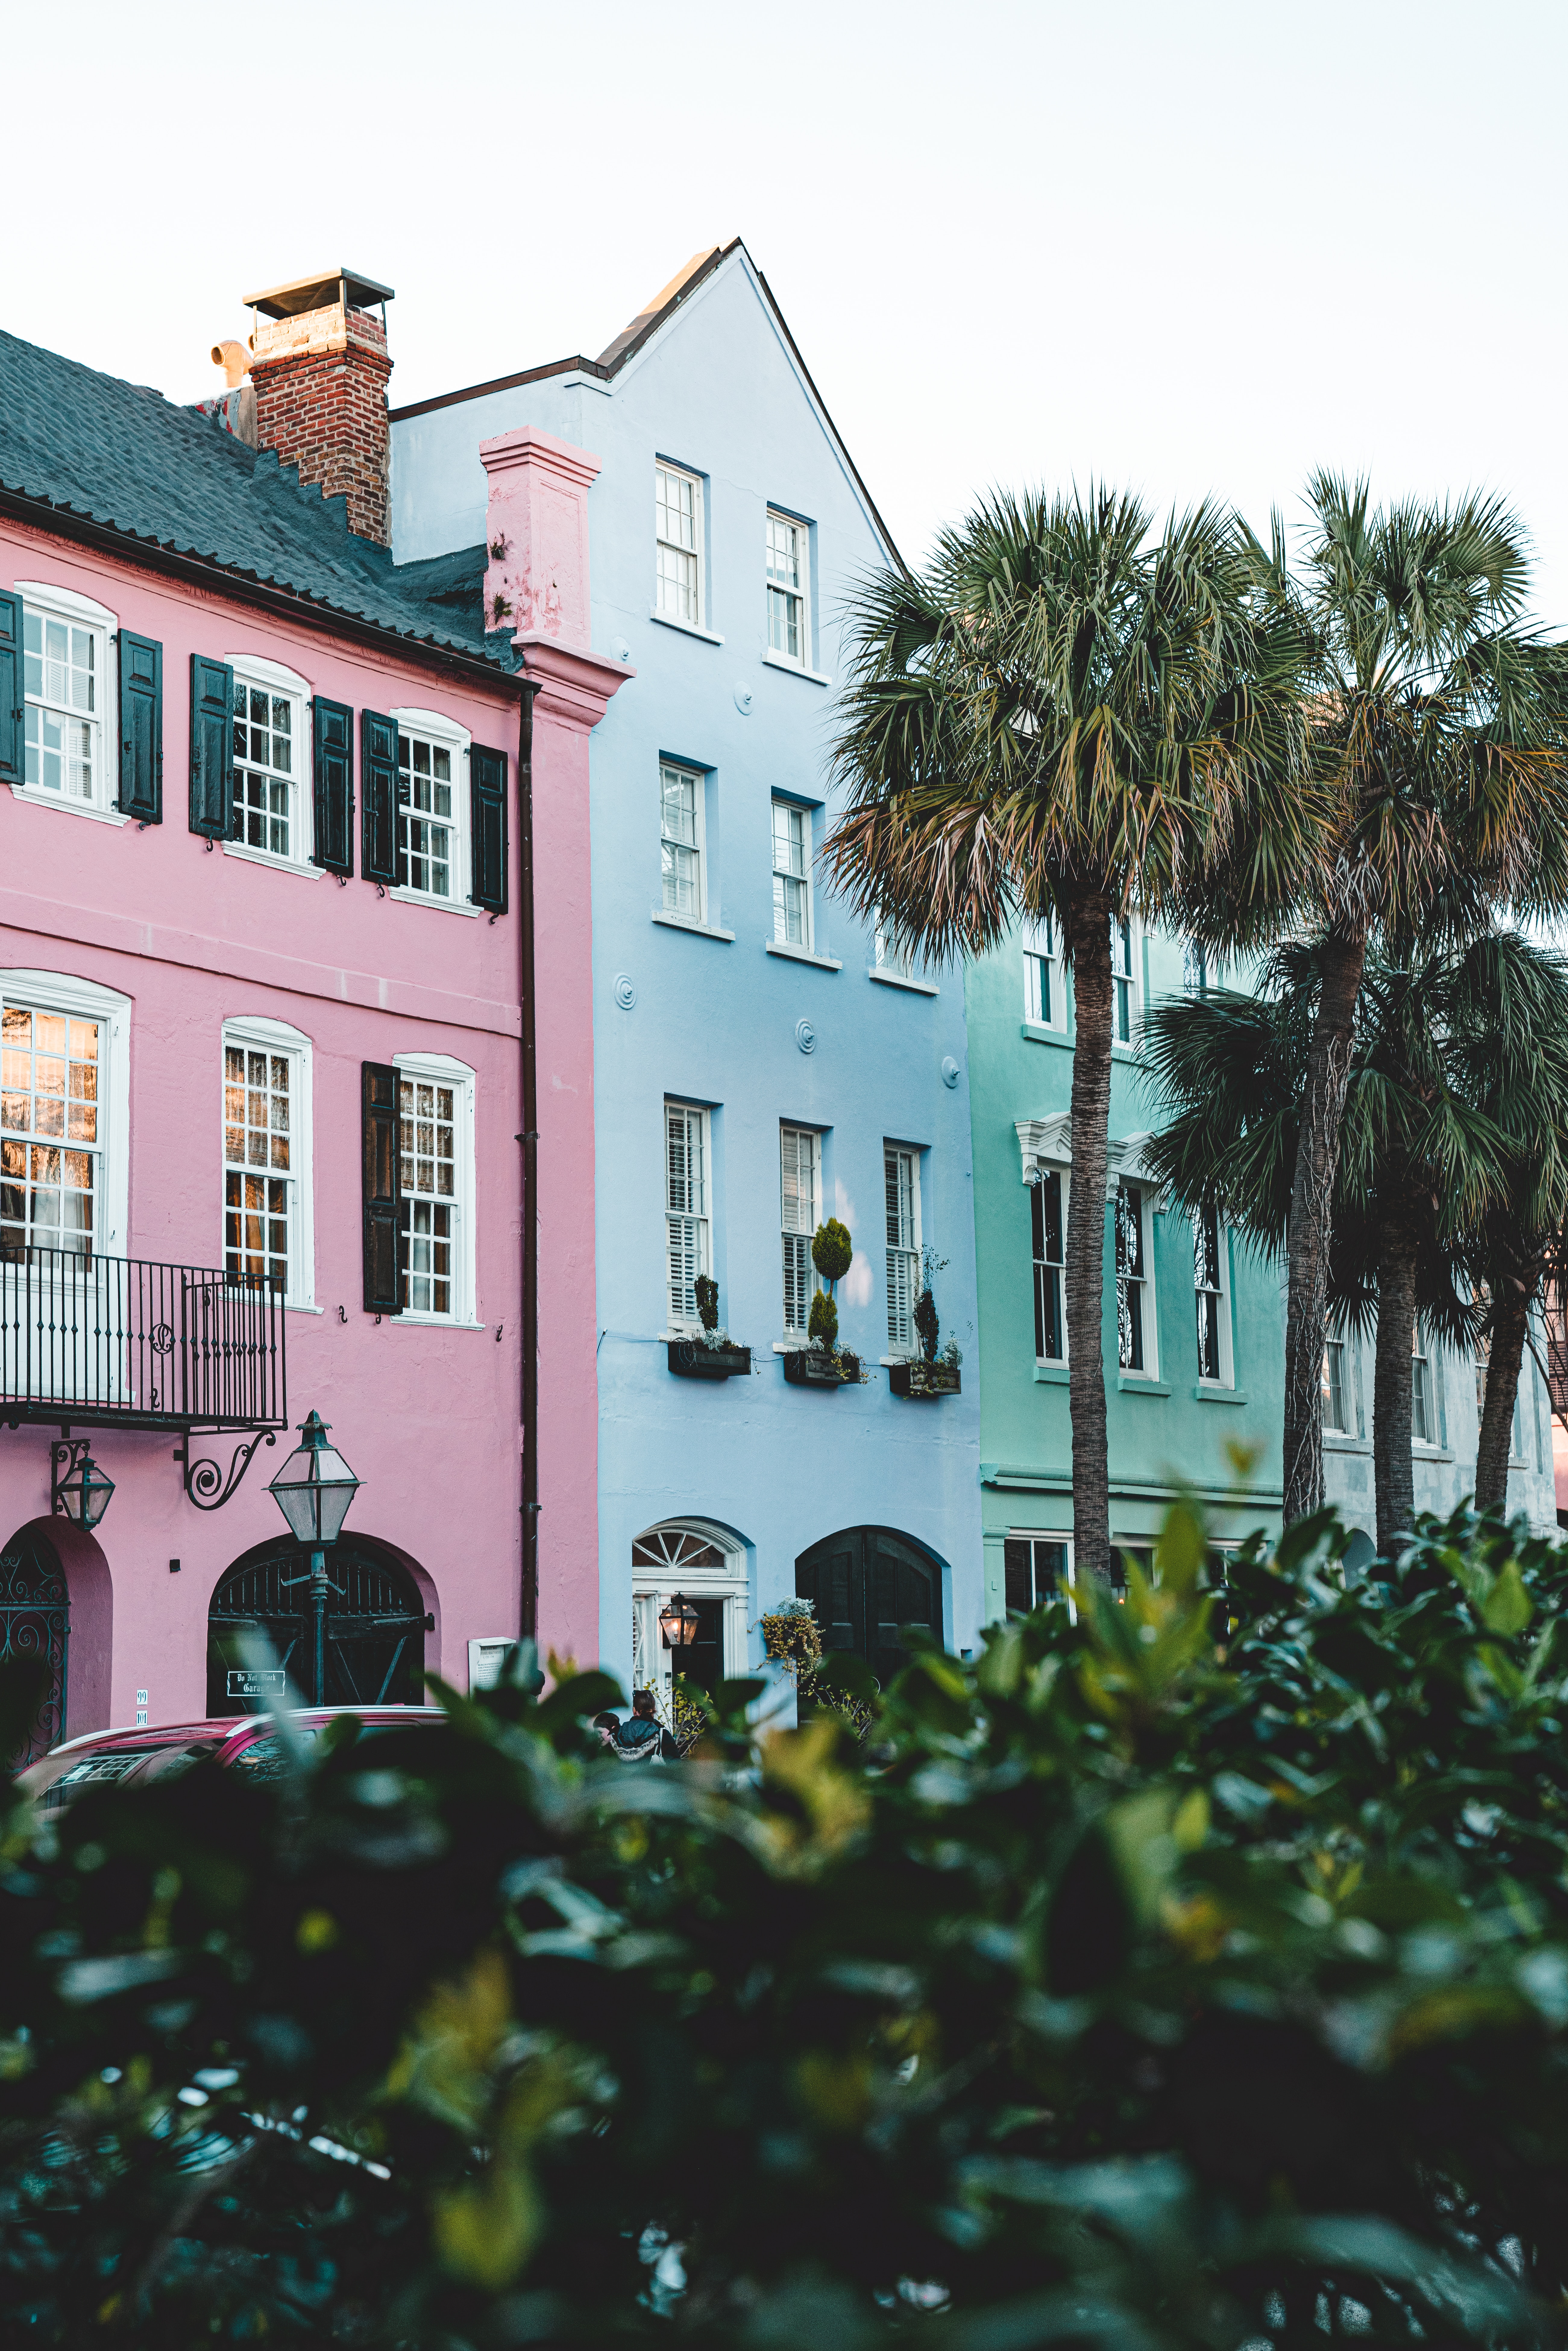 Things to do in Charleston